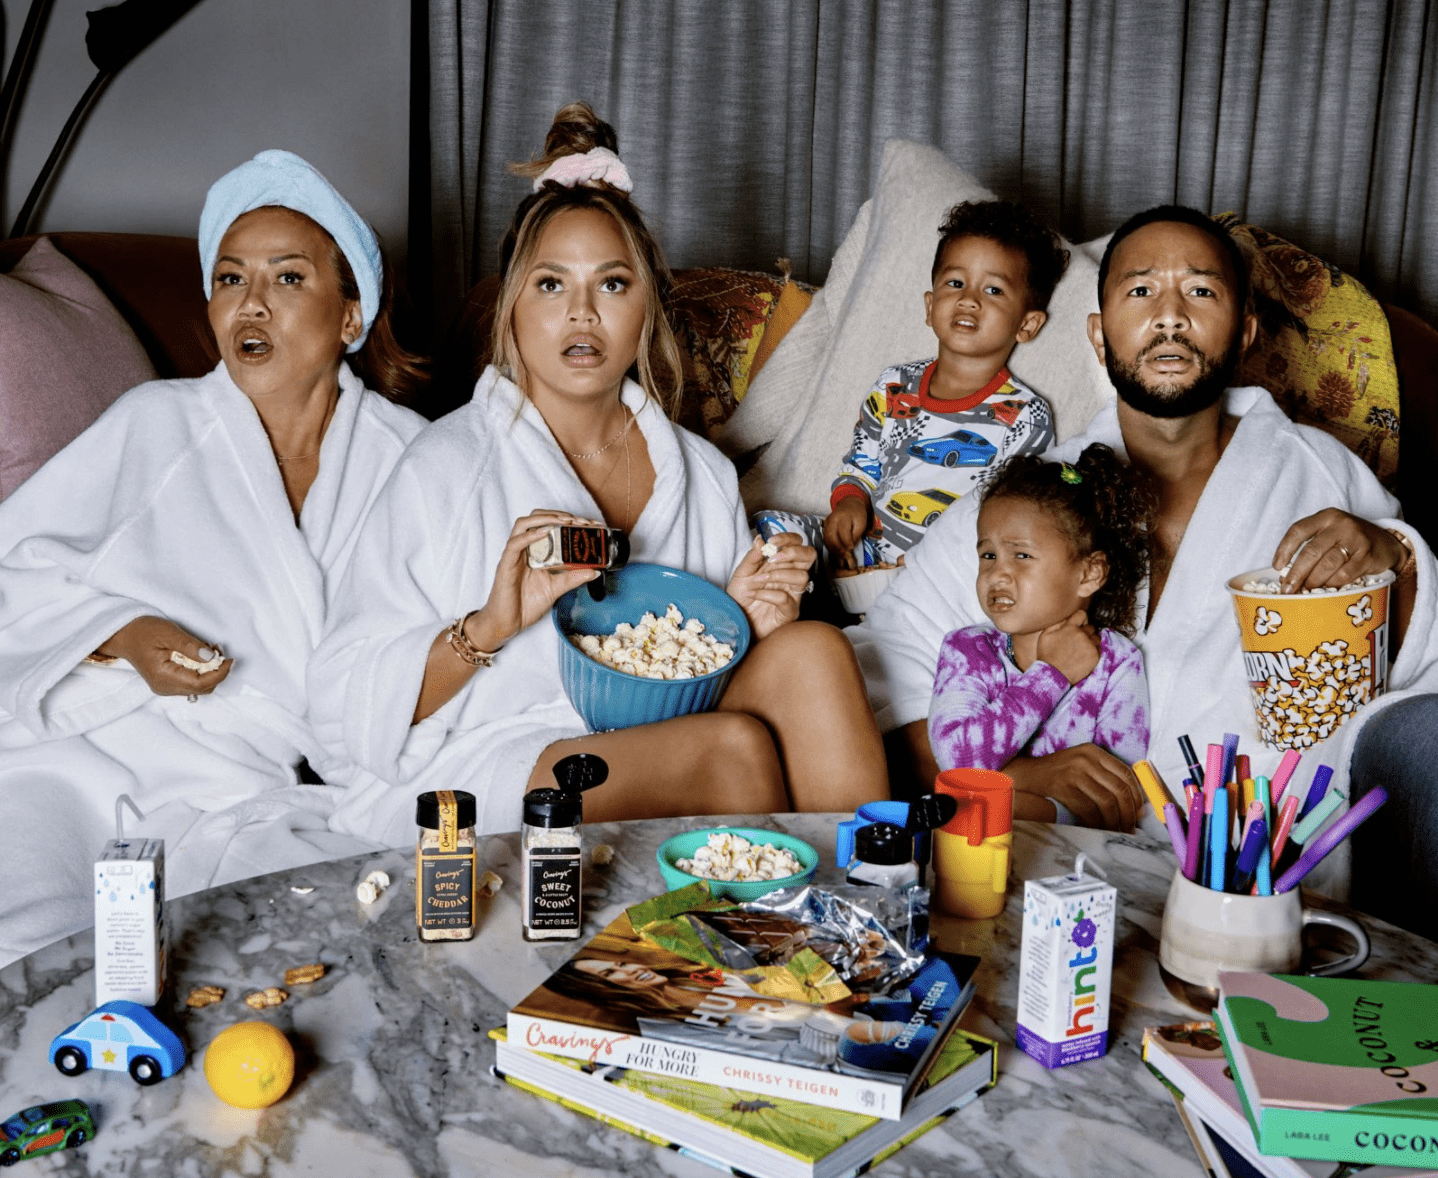 Chrissy Teigen's Cravings Cookware Is on Sale Right Now